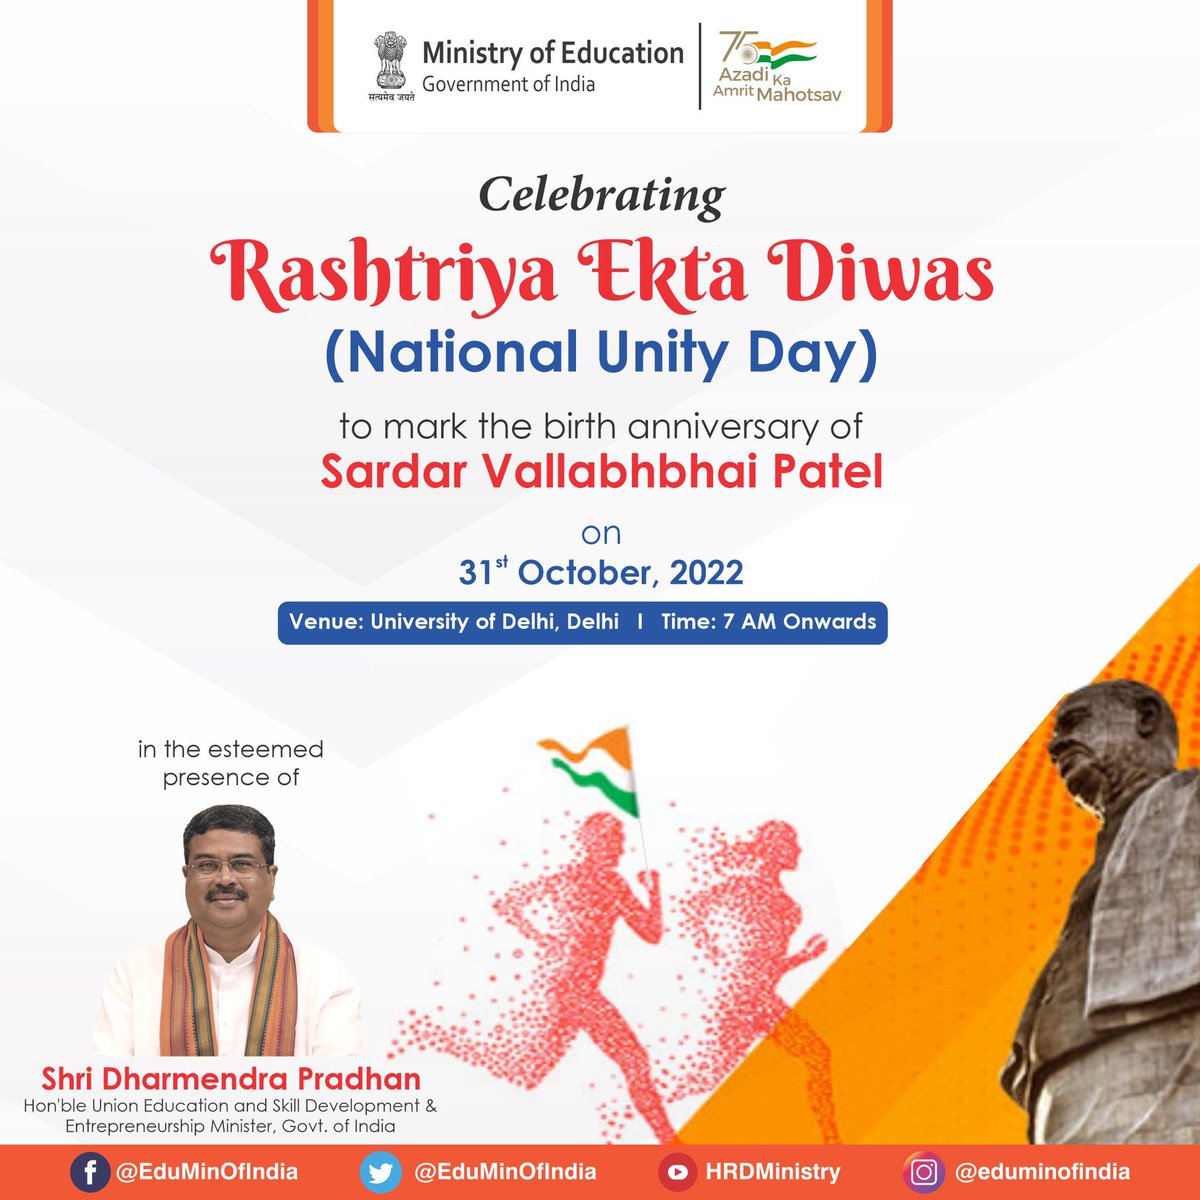 Marching ahead for a United India! Today, Hon’ble Education Minister Shri @dpradhanbjp will participate in the #UnityRun to mark the 147th birth anniversary of Sardar Vallabhbhai Patel. Stay tuned! #RashtriyaEktaDiwas